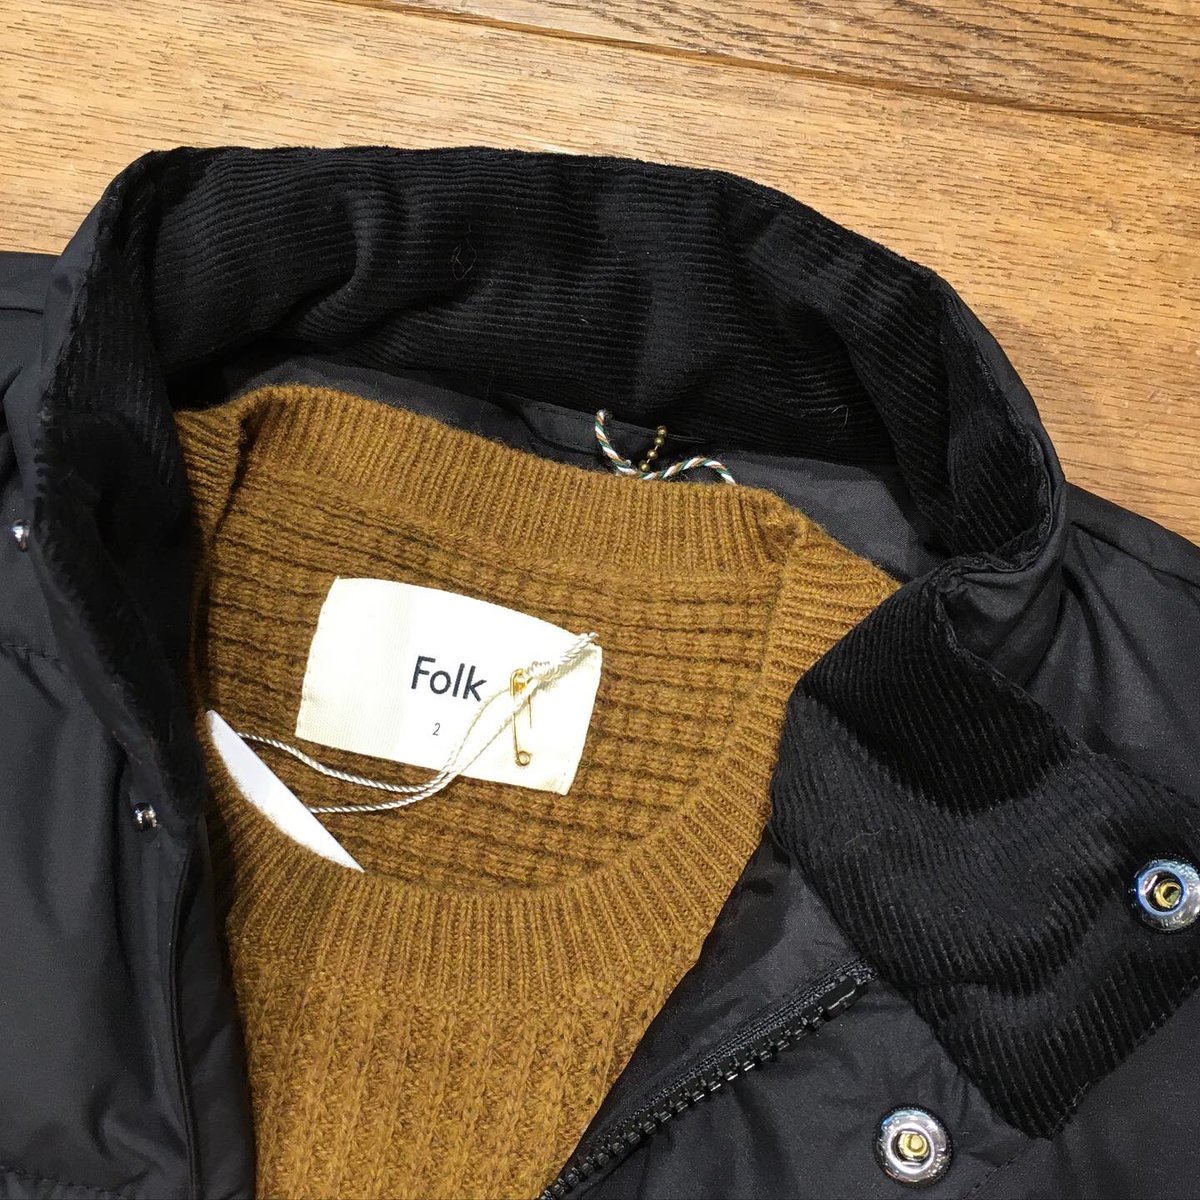 Winter layers from @folkclothing @barbour @grensonshoes 
#flukebanstead #folk #barbour #grenson #layers #winterwardrobe #gilet #hikingboots #mensfashion #menswear #supportsmallbusiness #supportyourhighstreet #shoplocal #banstead #sutton #epsom #kingswood #surrey #london